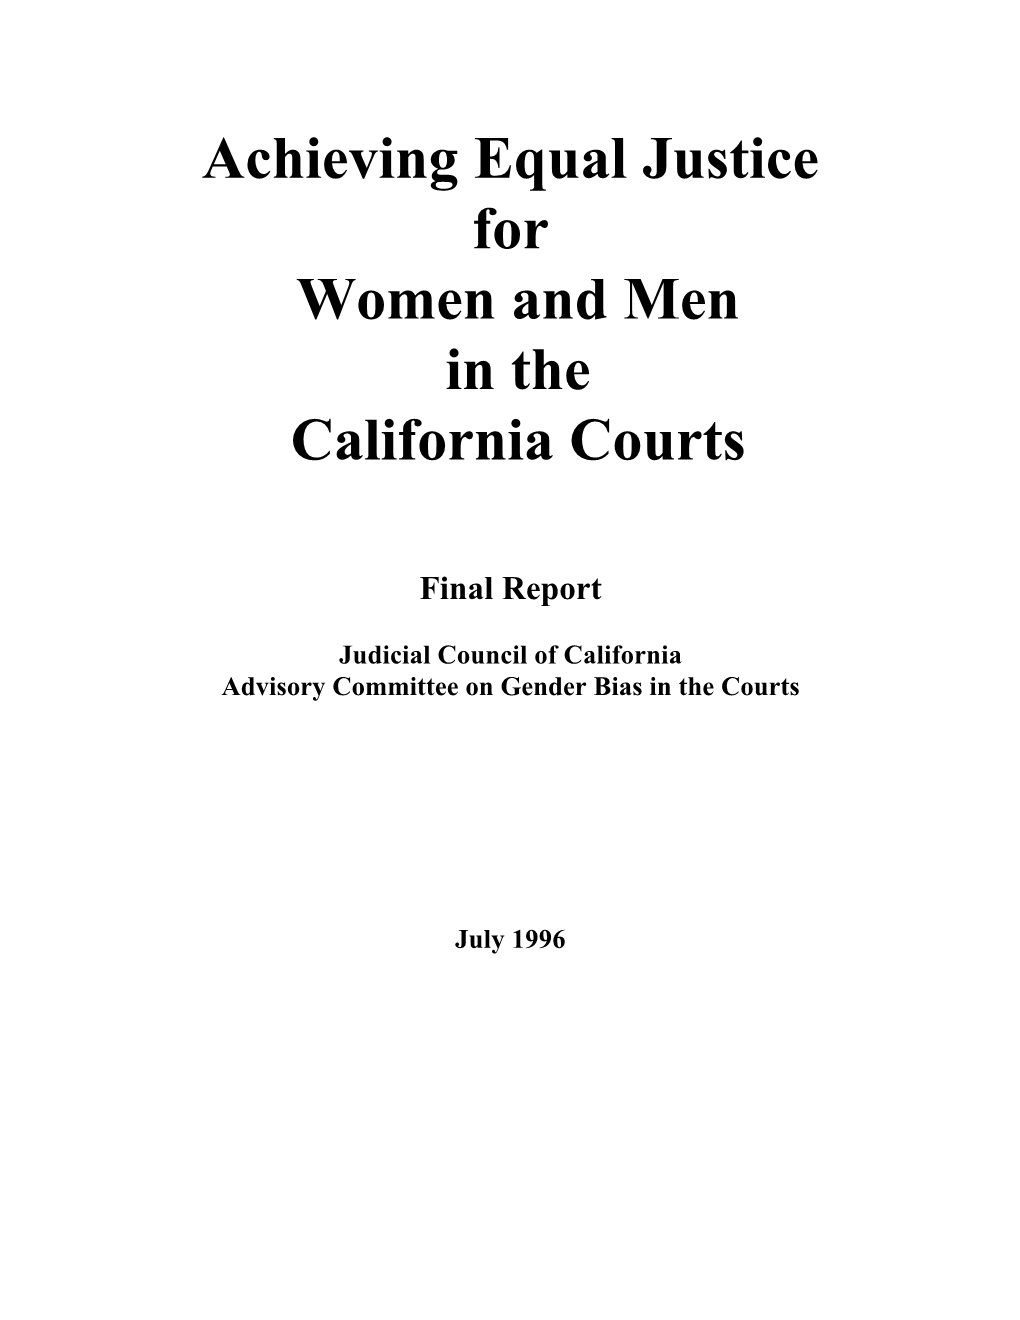 Achieving Equal Justice for Women and Men in the California Courts